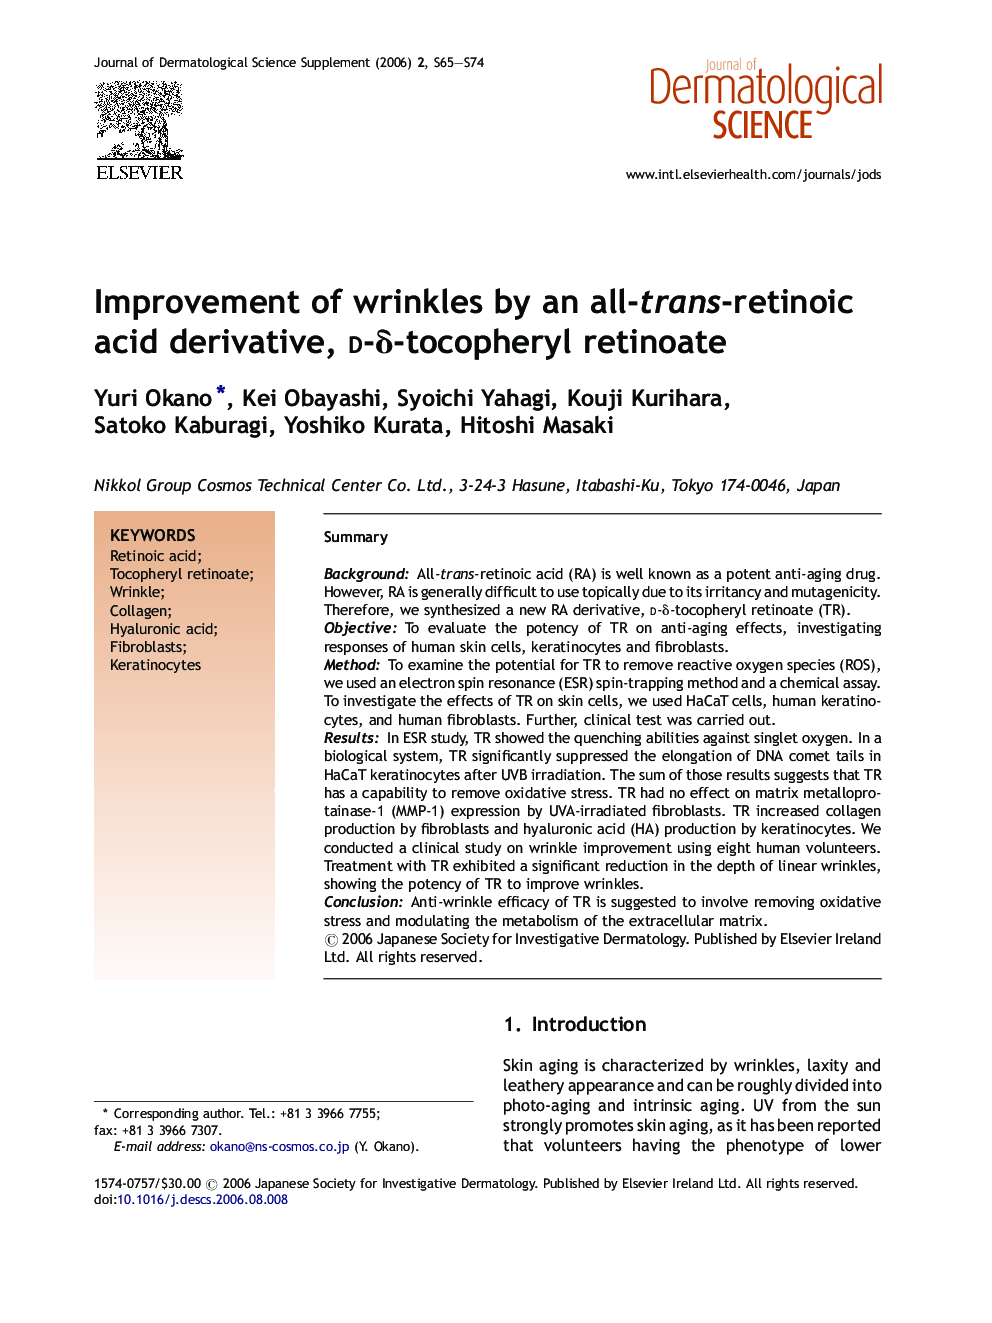 Improvement of wrinkles by an all-trans-retinoic acid derivative, d-δ-tocopheryl retinoate